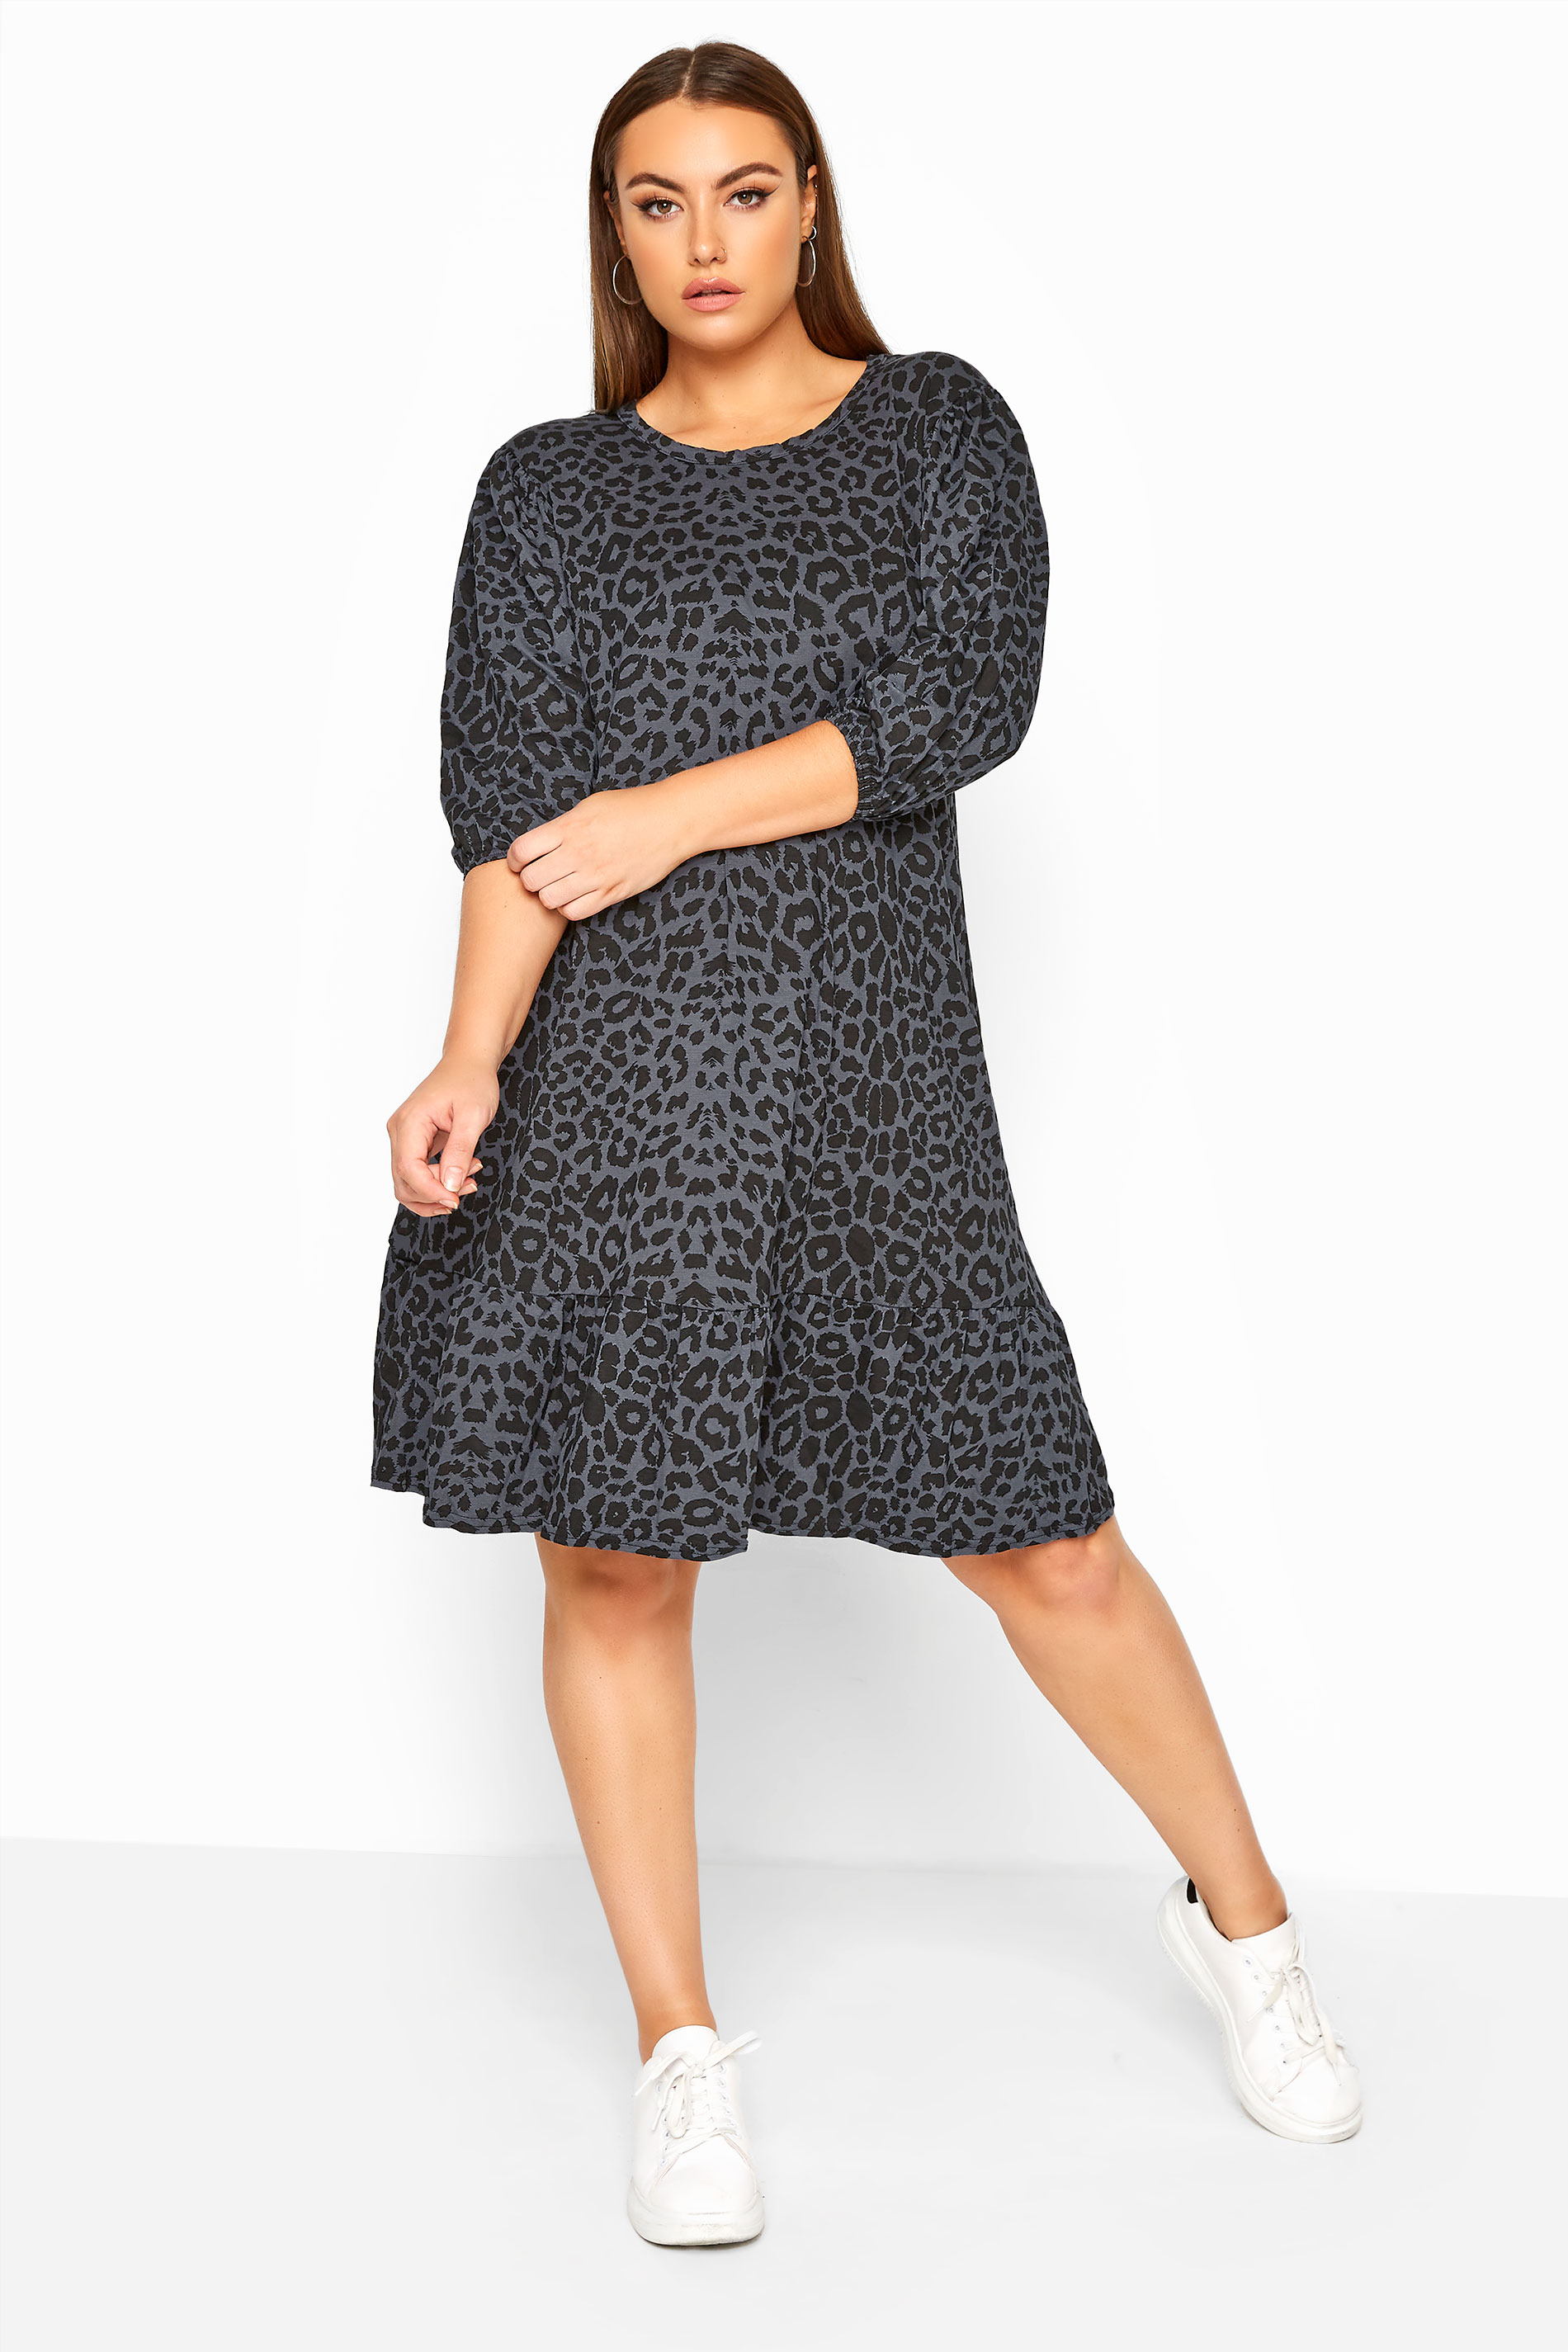 LIMITED COLLECTION Grey Leopard Print Smock Dress | Yours Clothing